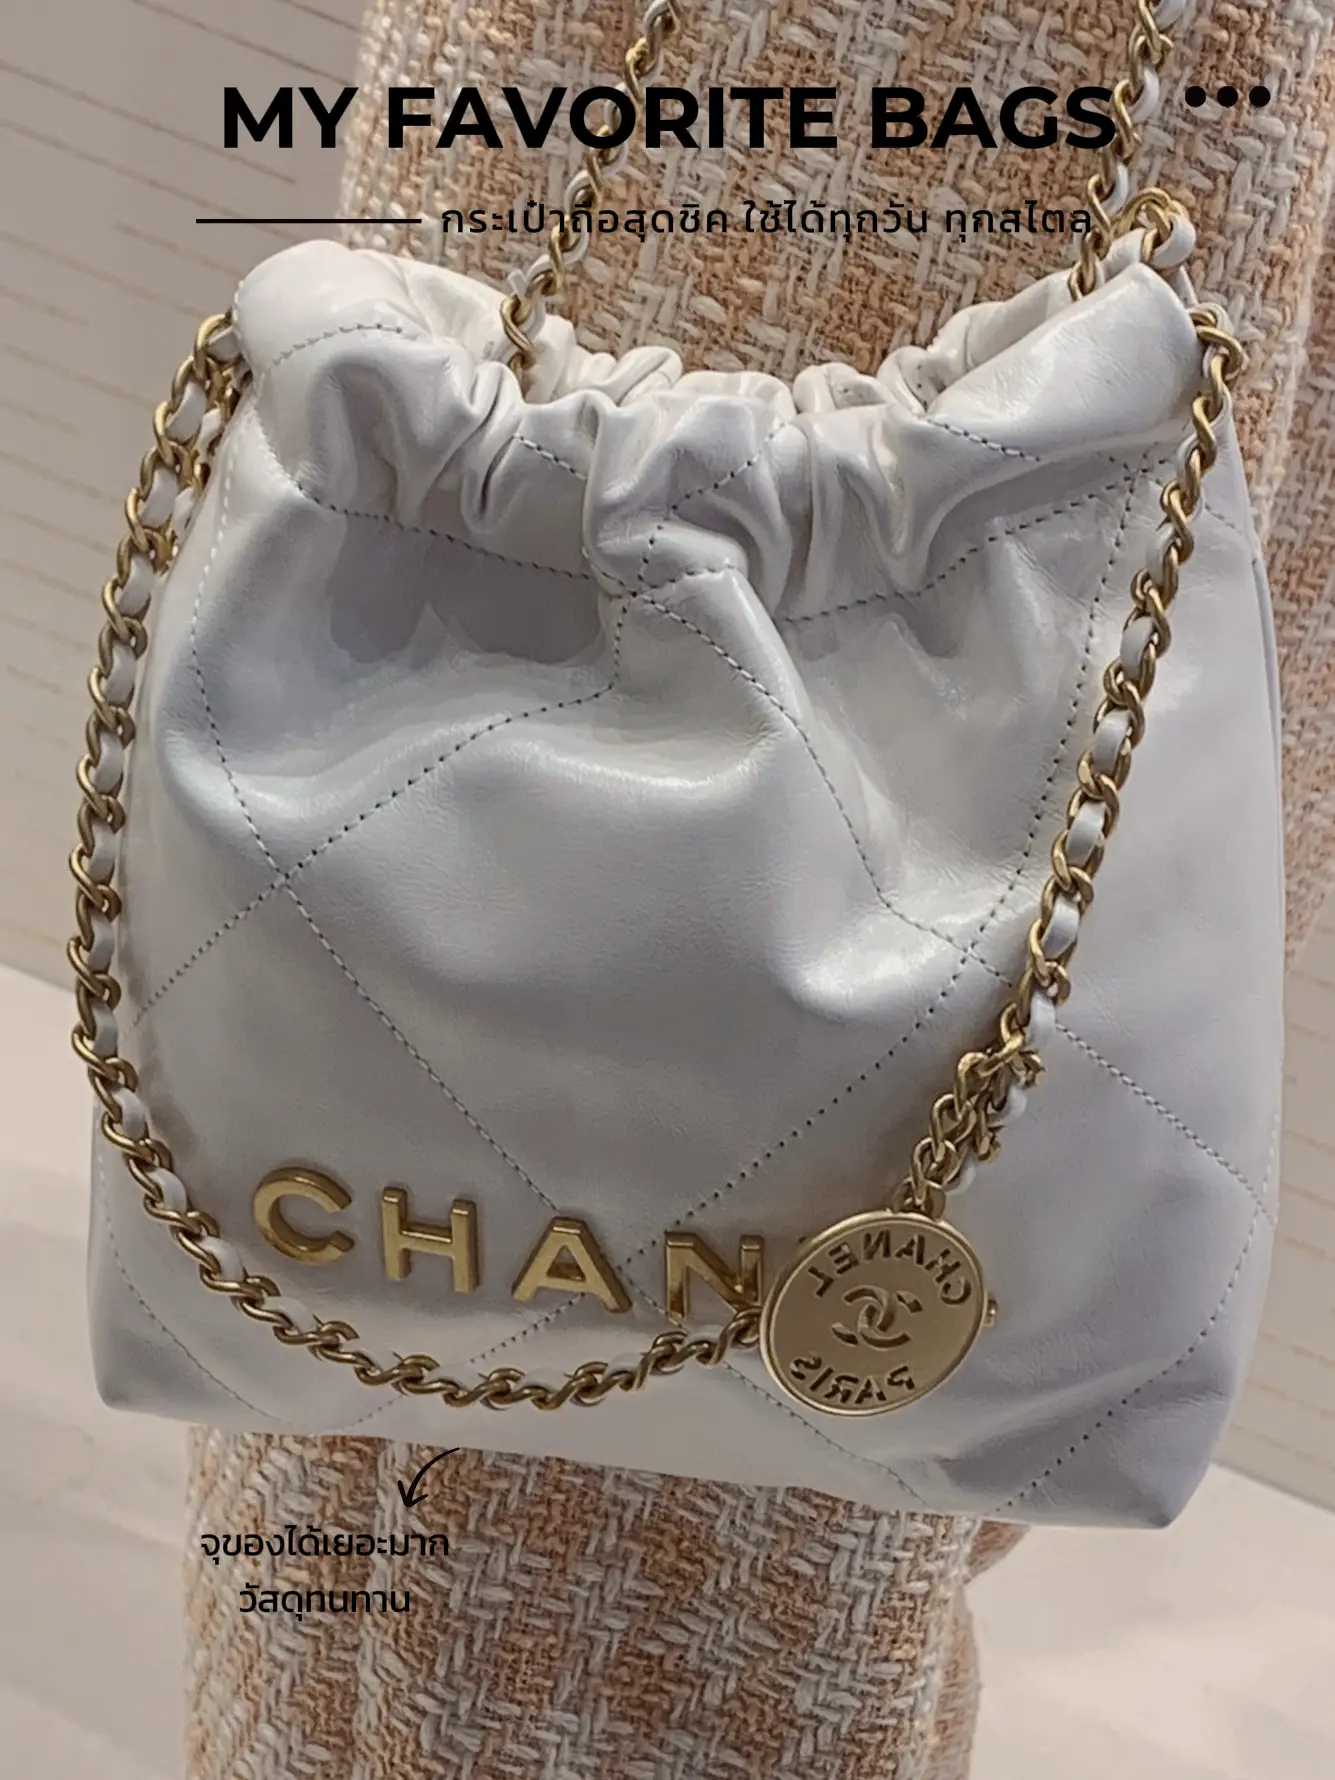 Some of the most expensive Chanel items owned by Blackpink's Jennie